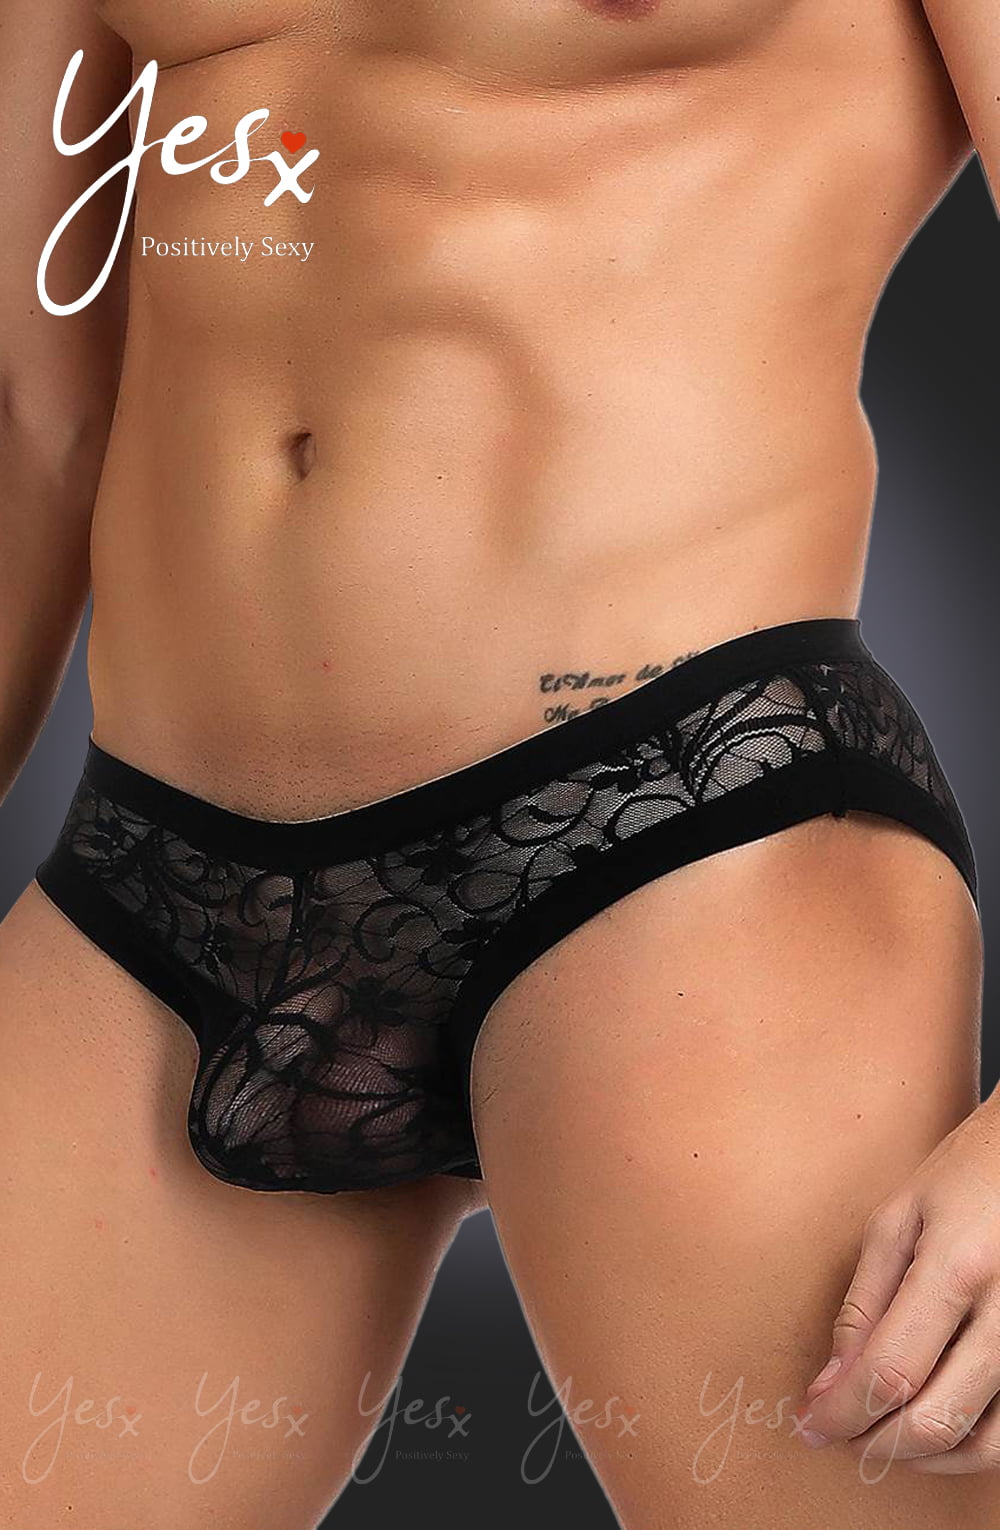 YesX YX973 Men's Brief - Black Sheer Floral Lace Design, Comfortable & Stretchy Fit